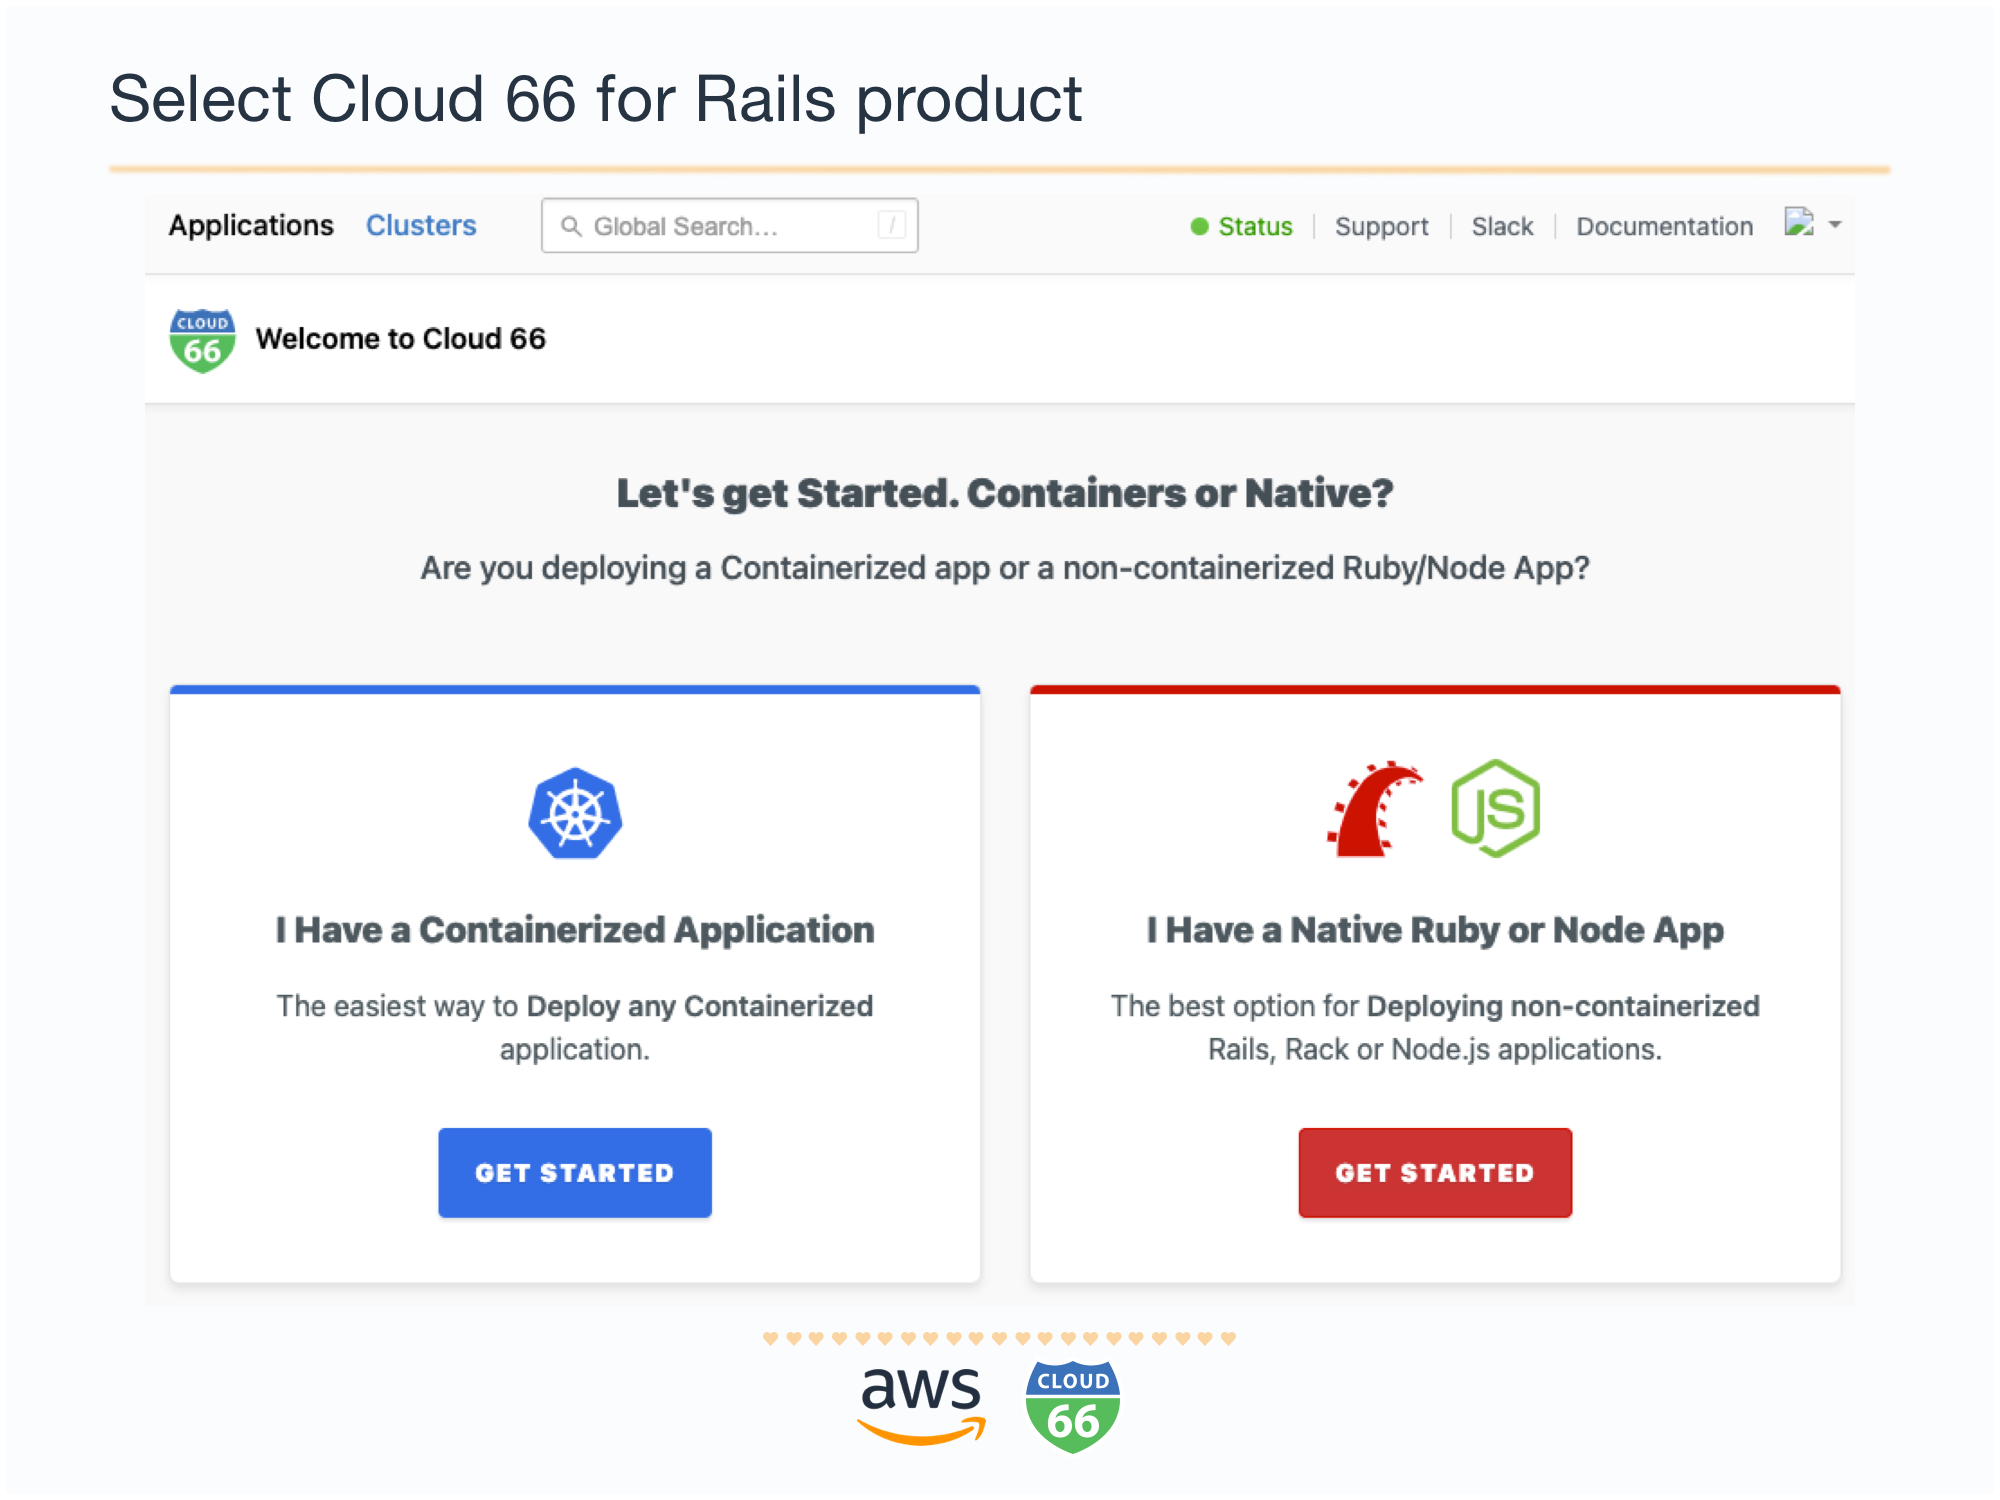 Welcome to Cloud 66 Dashboard. Step 1: Select Cloud 66 for Rails product.